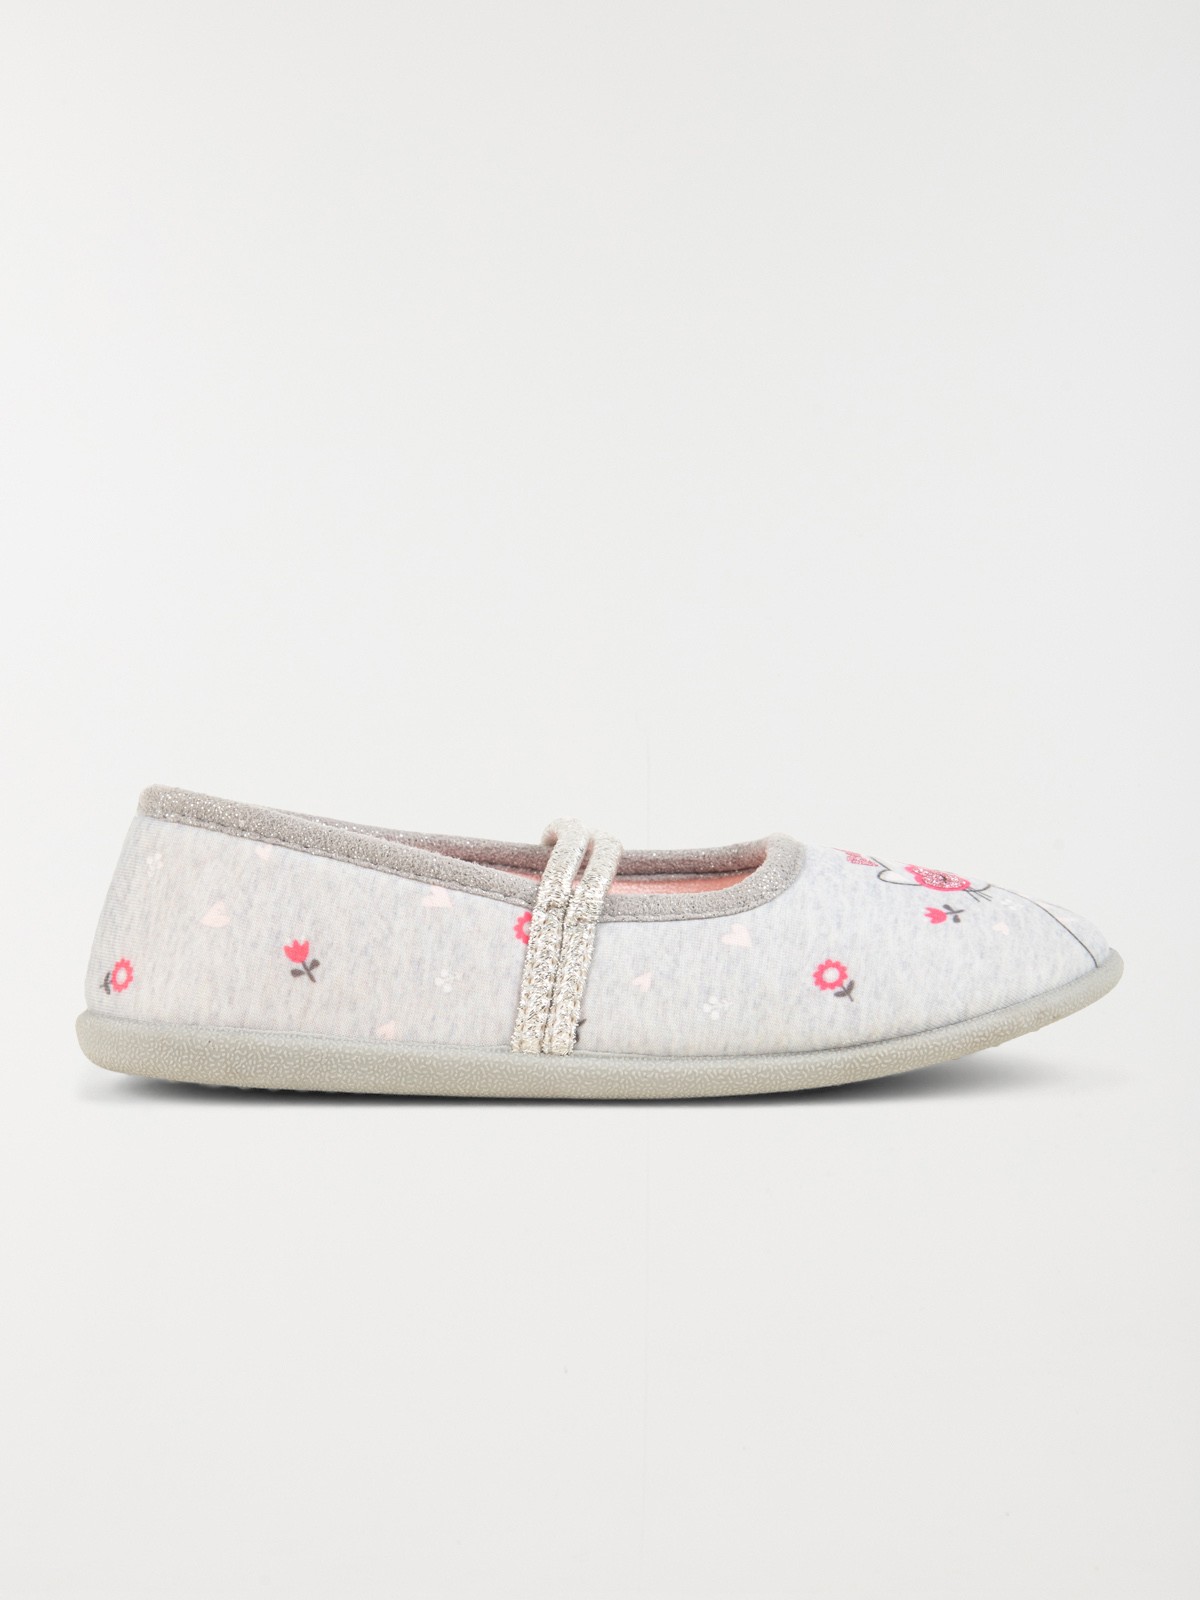 Chaussons chat princesse fille (31-35) - DistriCenter